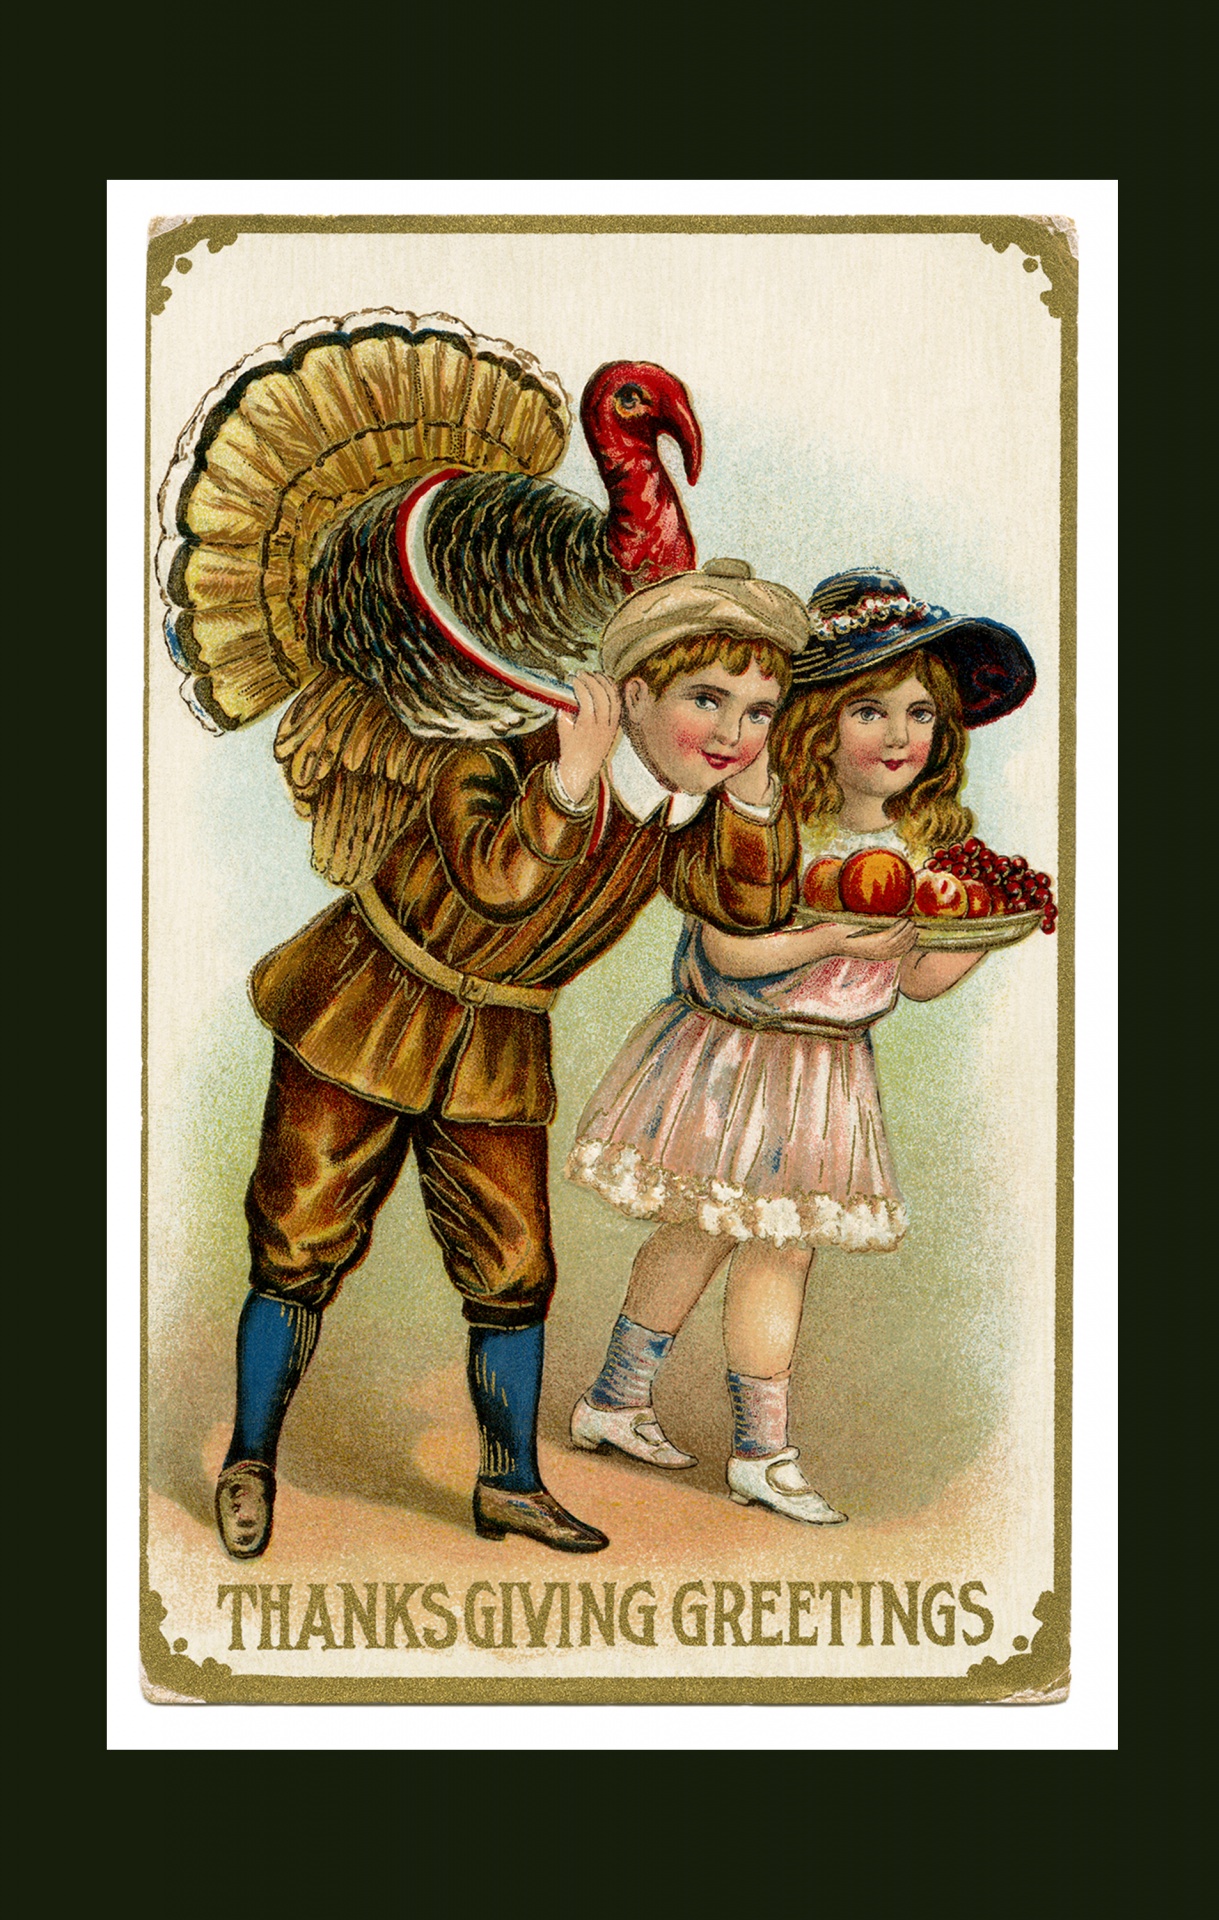 Vintage thanksgiving day card template with children and turkey illustration